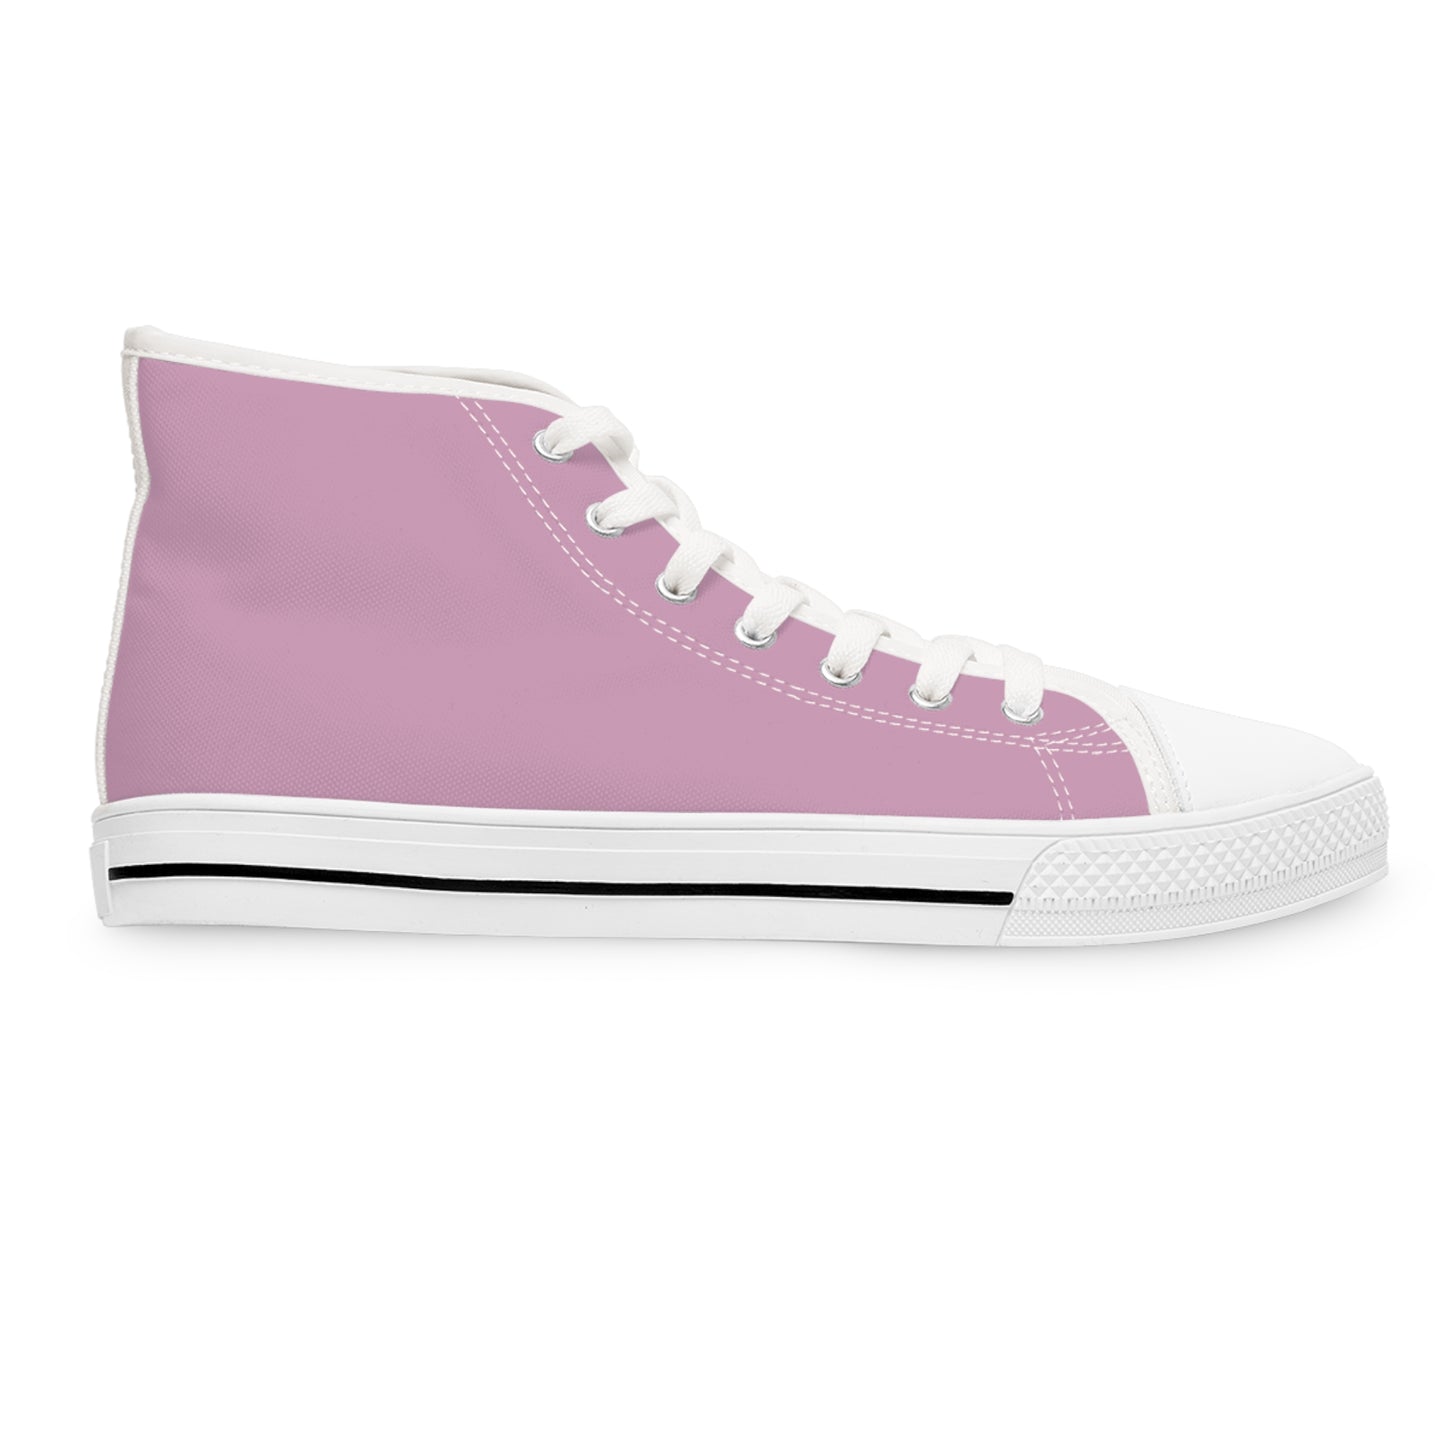 Women's Canvas High Top Solid Color Sneakers - Faded Bubblegum US 12 White sole